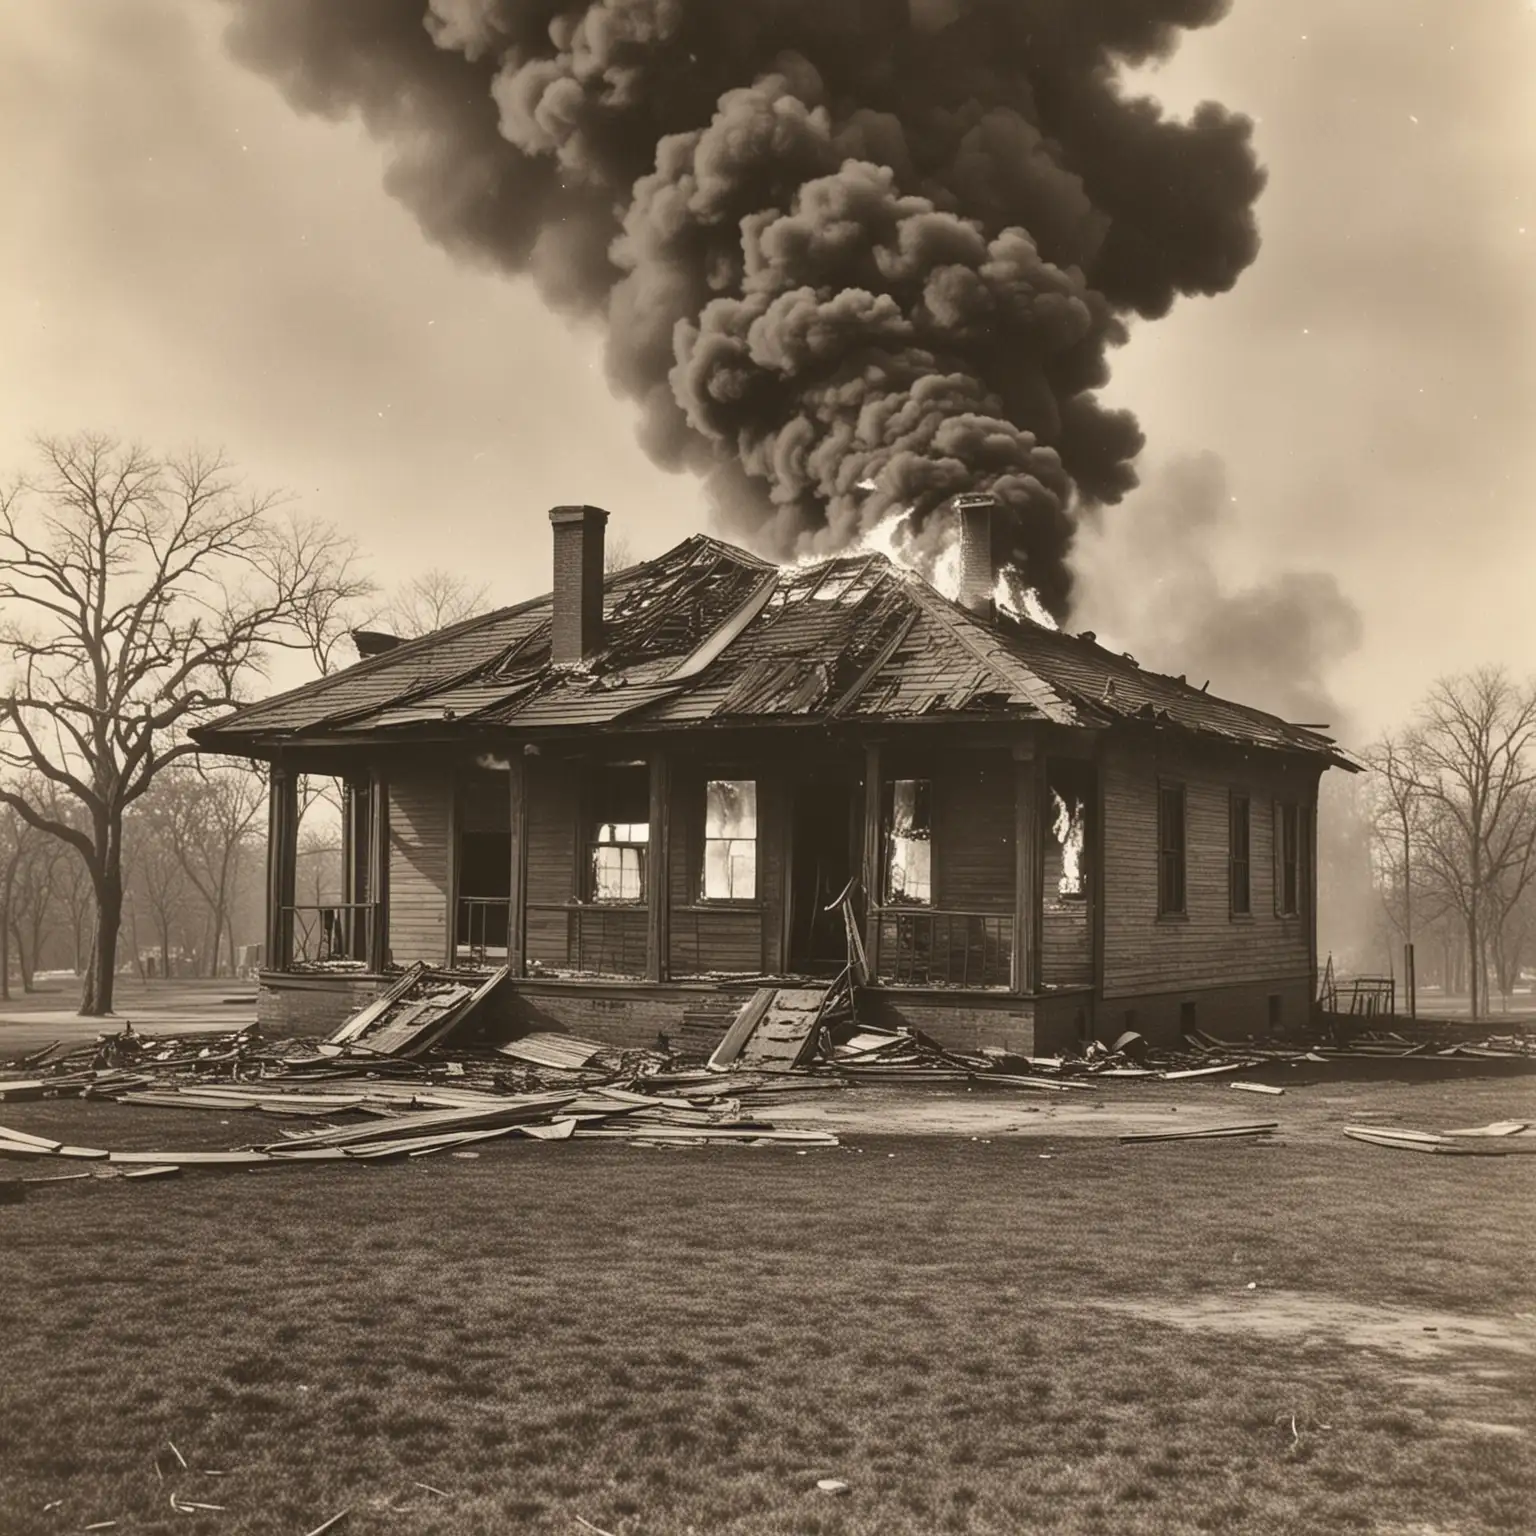 African American Schoolhouse Engulfed in Flames